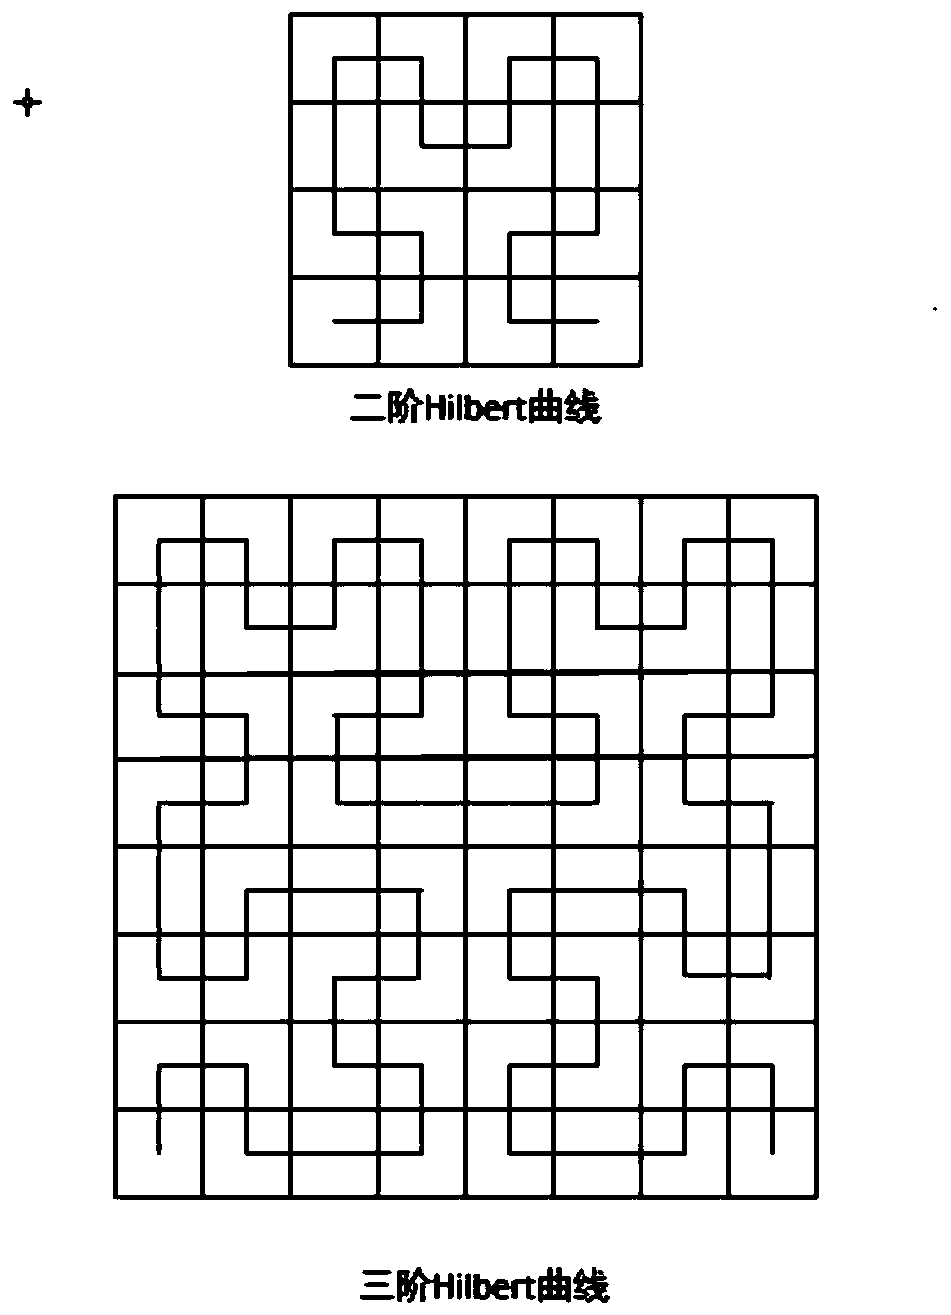 Hilbert curve encoding and decoding method based on state view